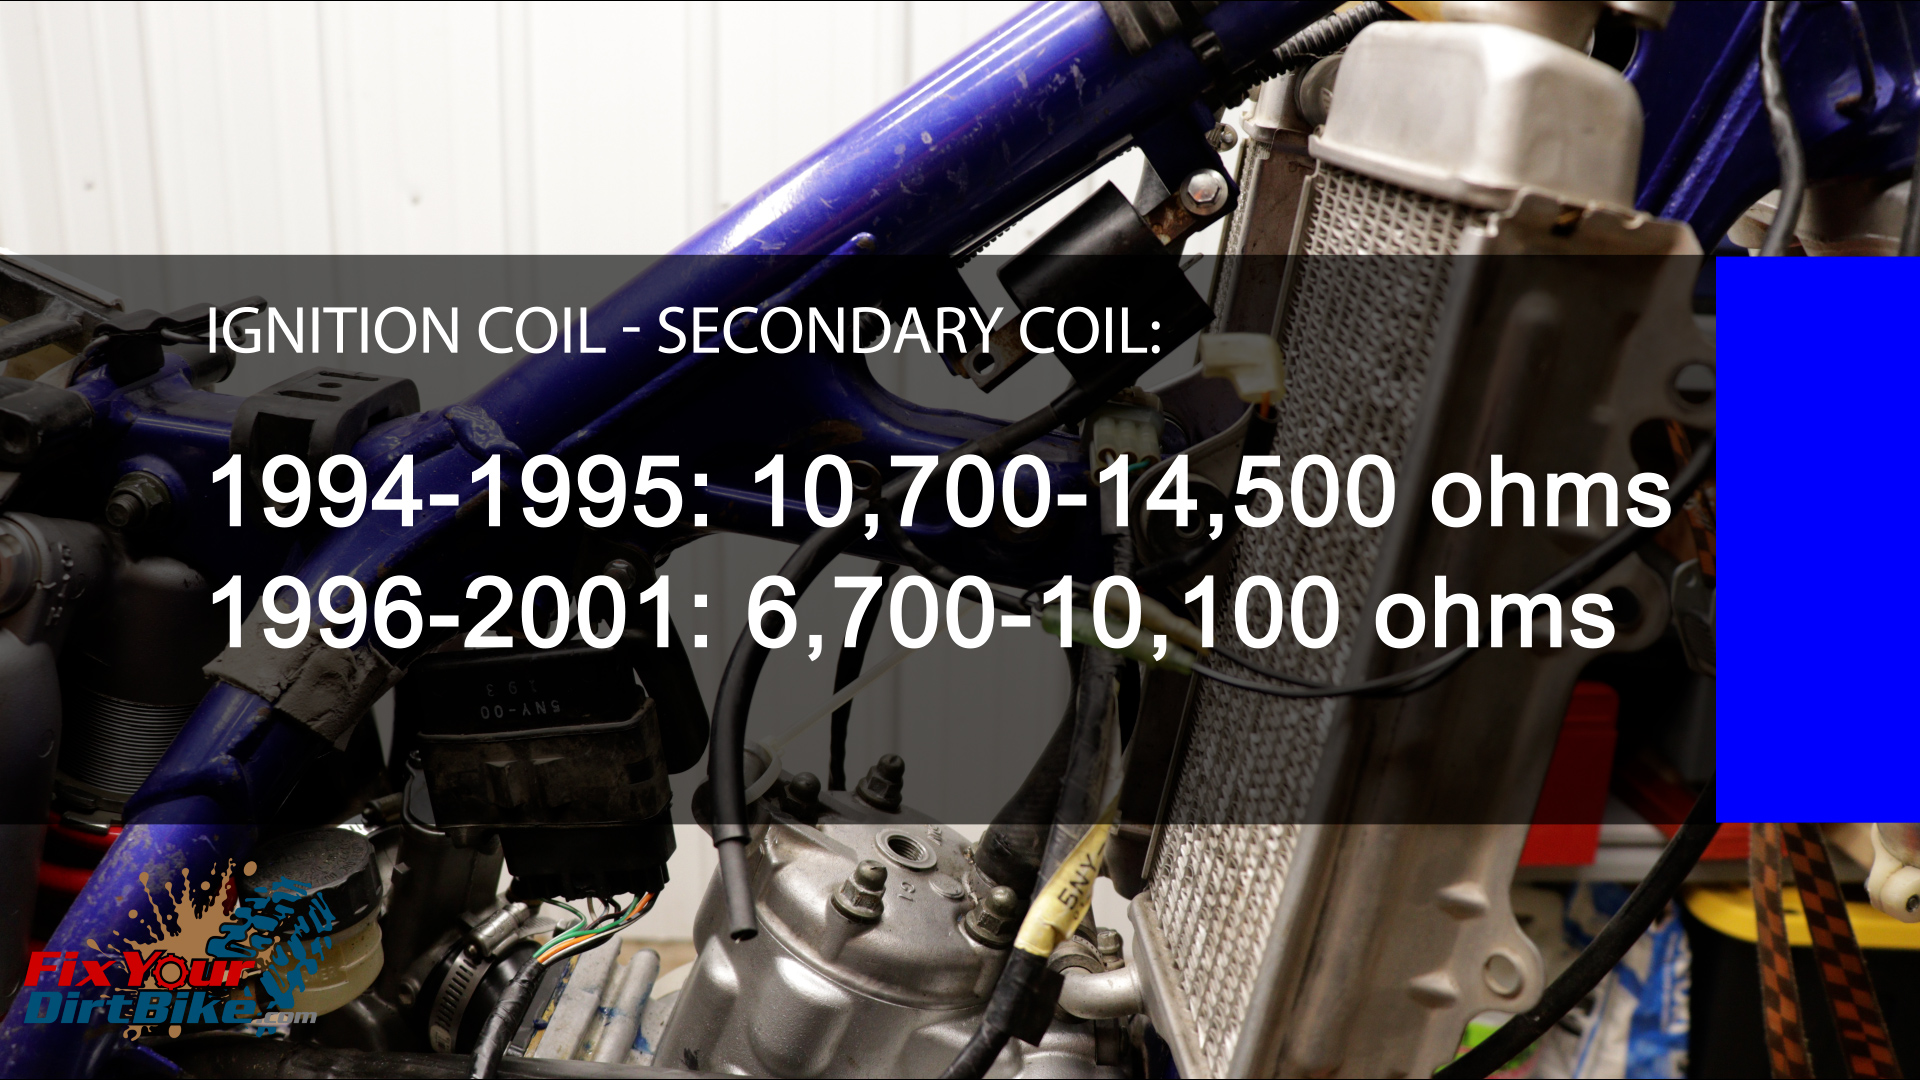 15 - Ignition Coil Secondary Coil Specifications